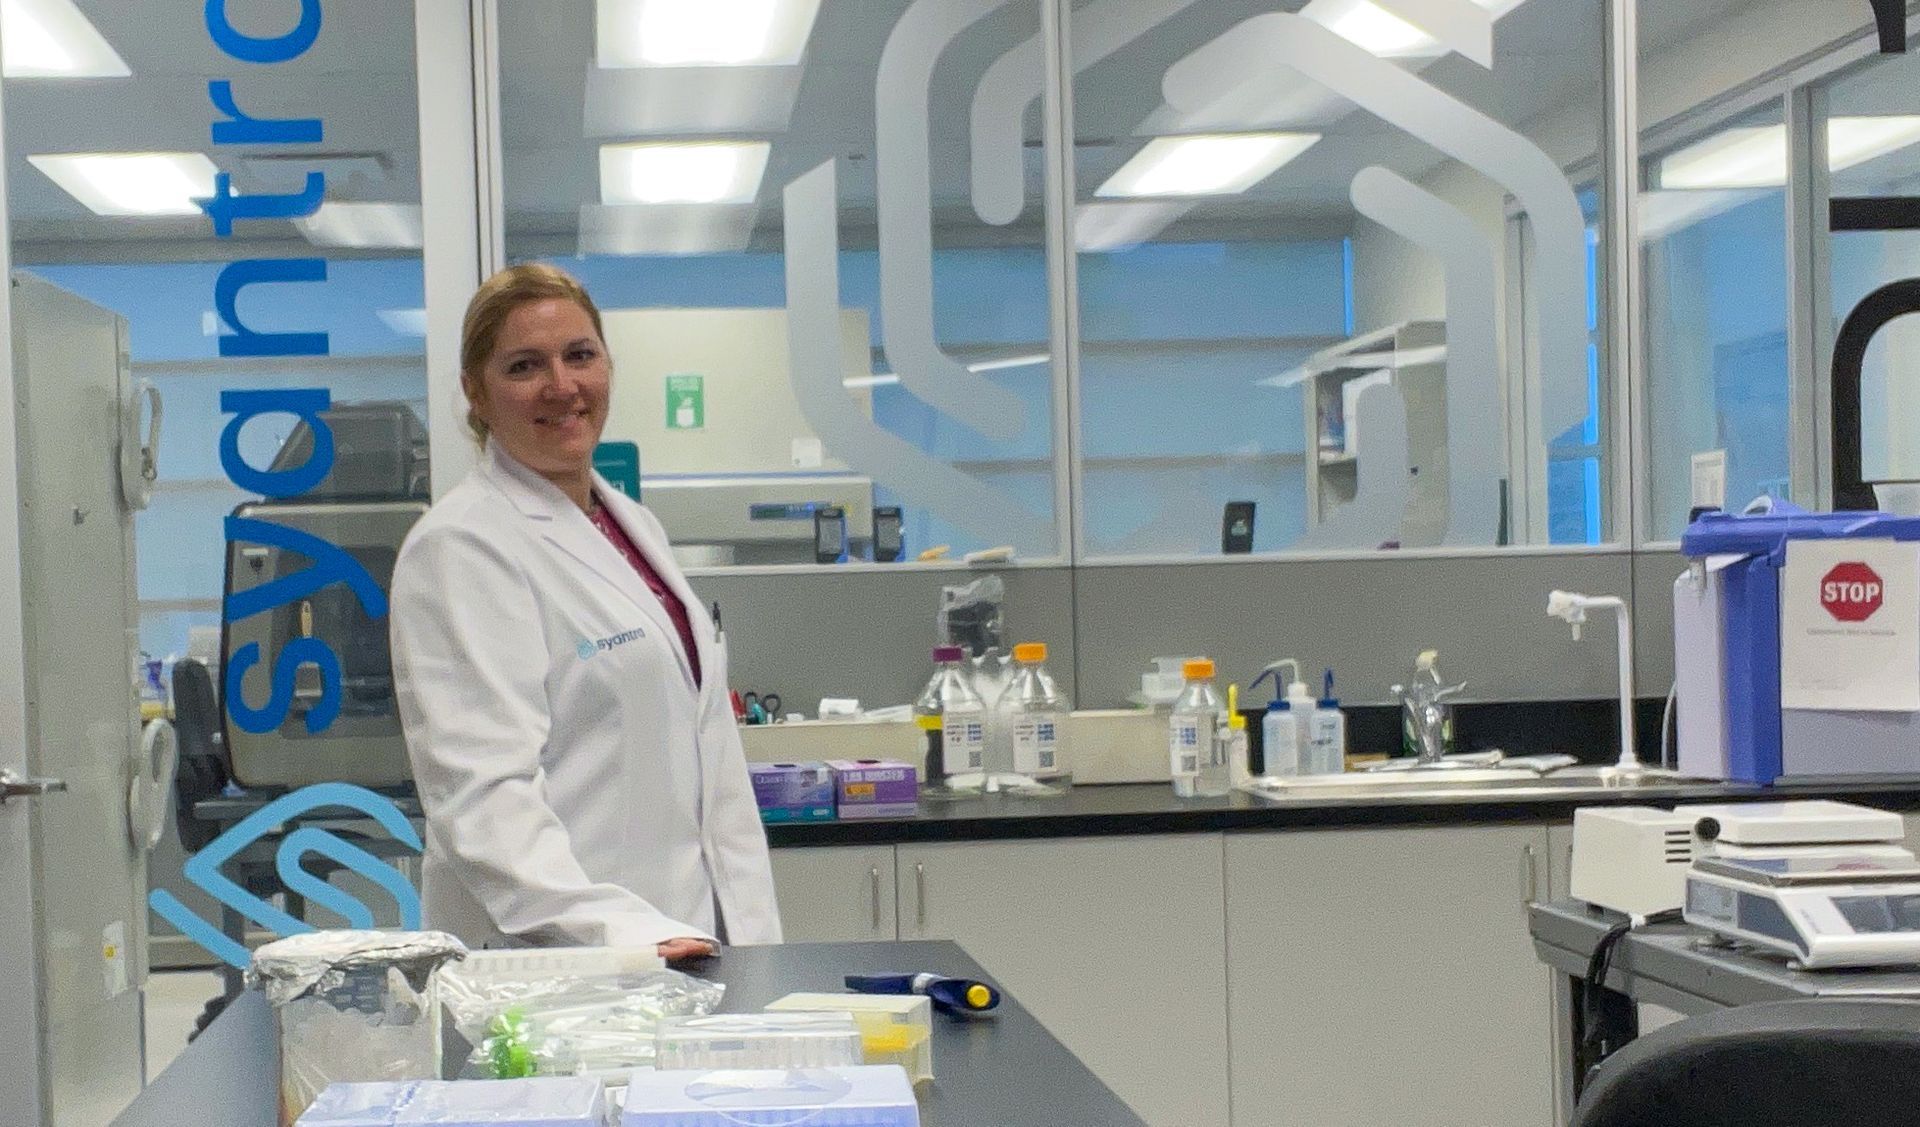 Olesya Kharenko stands in front of Syantra lab in lab coat.